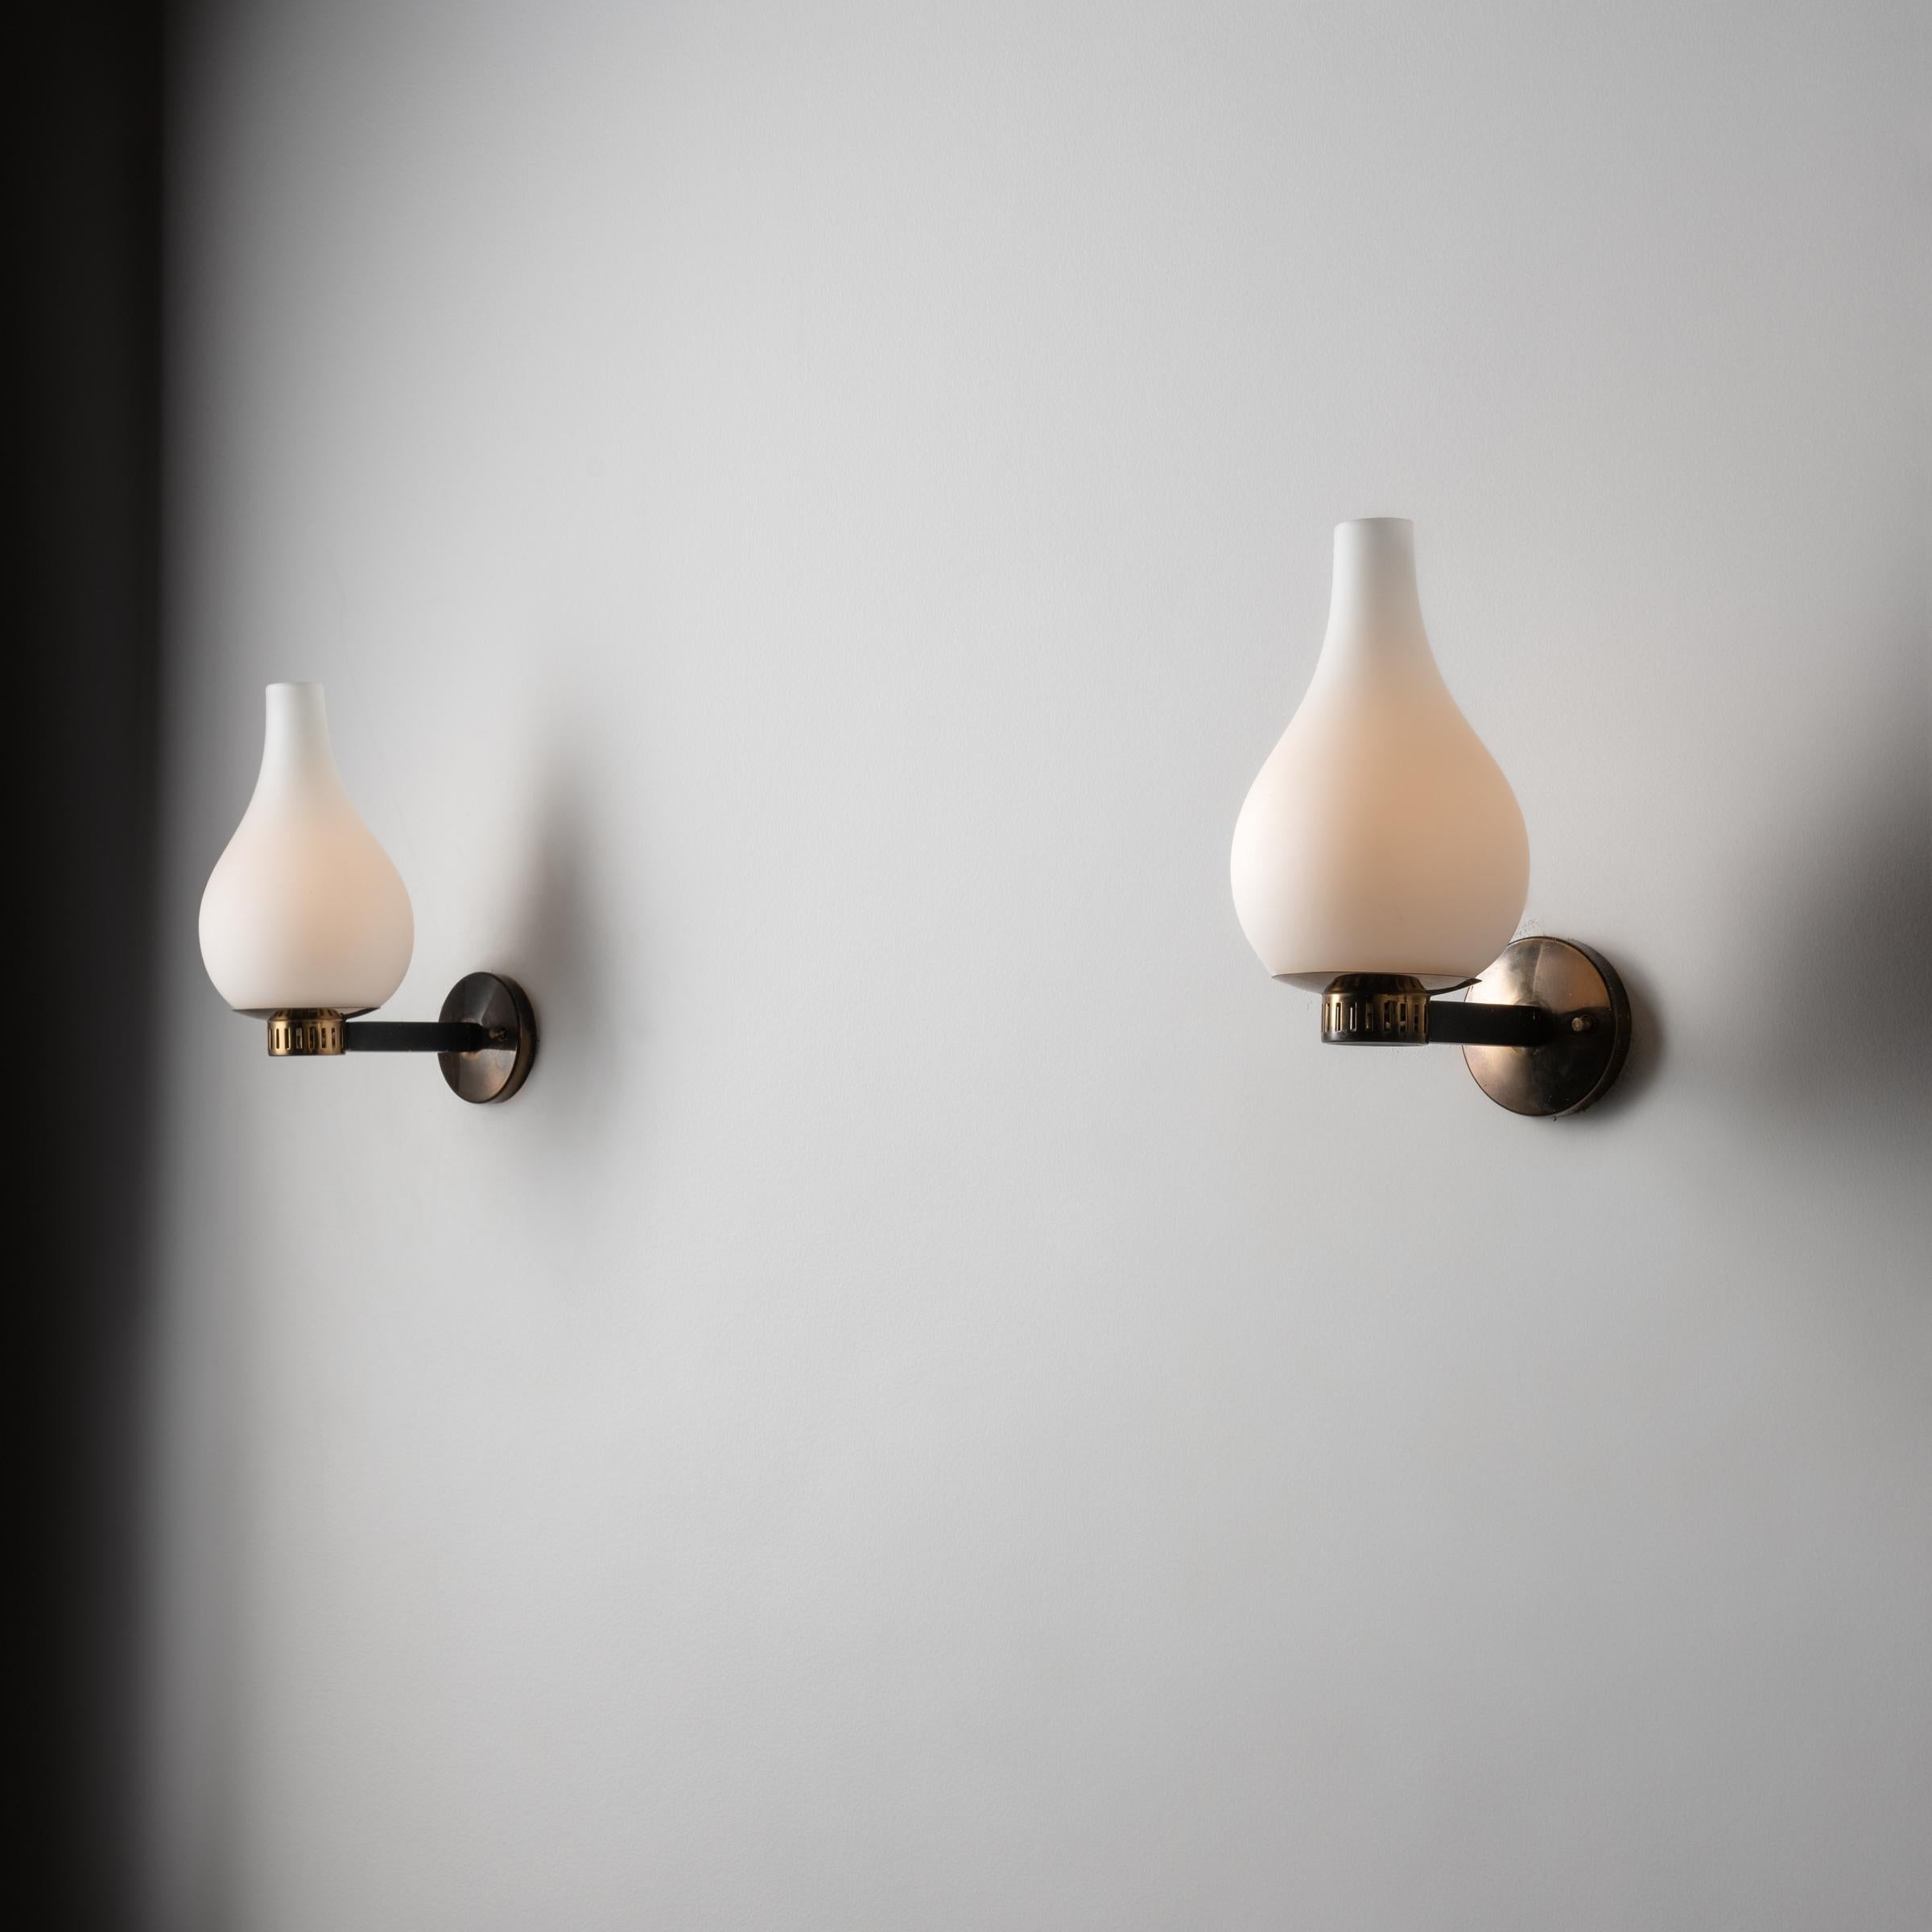 Pair of Sconces by Stilnovo. Designed and manufactured in Italy, circa 1950's. Brushed satin glass diffusers, brass. Custom brass backplates. Rewired for U.S. standards. We recommend one E27 60w maximum bulb per fixture. Bulbs not included. One pair